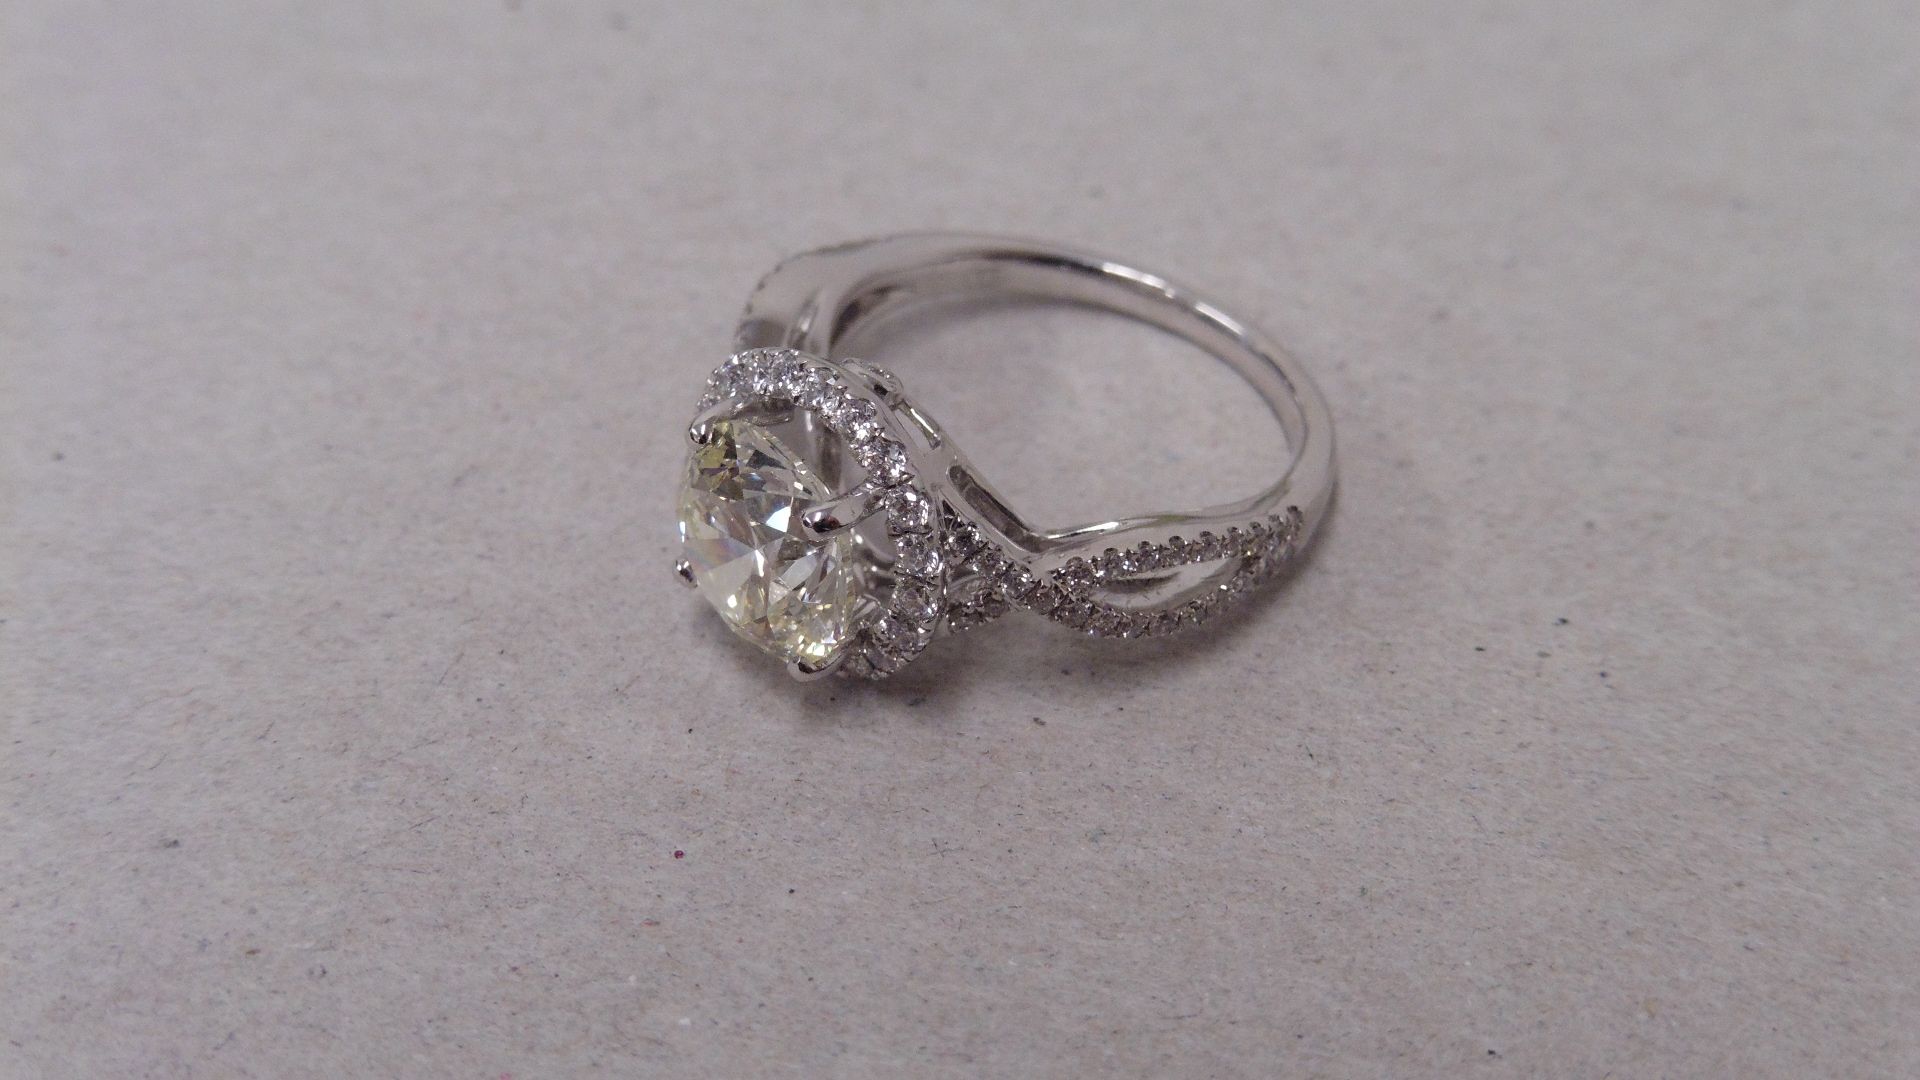 2.40ct diamond set solitaire ring. Brilliant cut diamond, J colour, si1 clarity. Halo setting with - Image 2 of 4